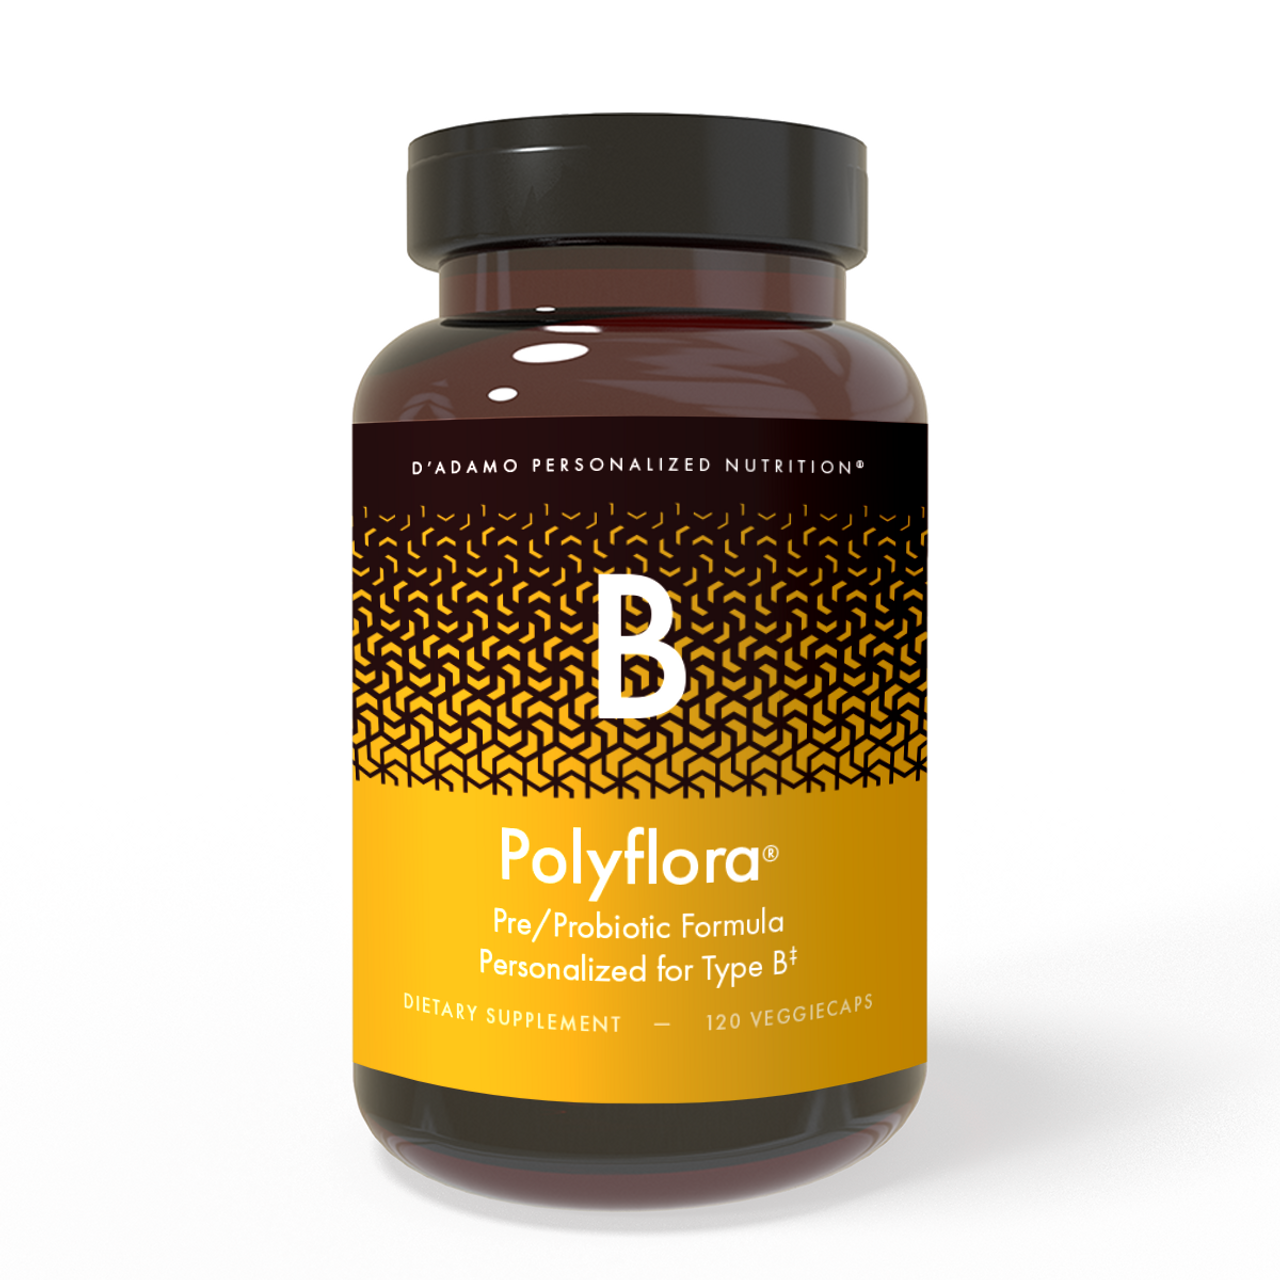 Polyflora - Pre-Probiotic (Blood Type B) - personalized probiotic with flora specifically beneficial for Blood Type B. Also includes prebiotic synergists to strengthen digestive health.